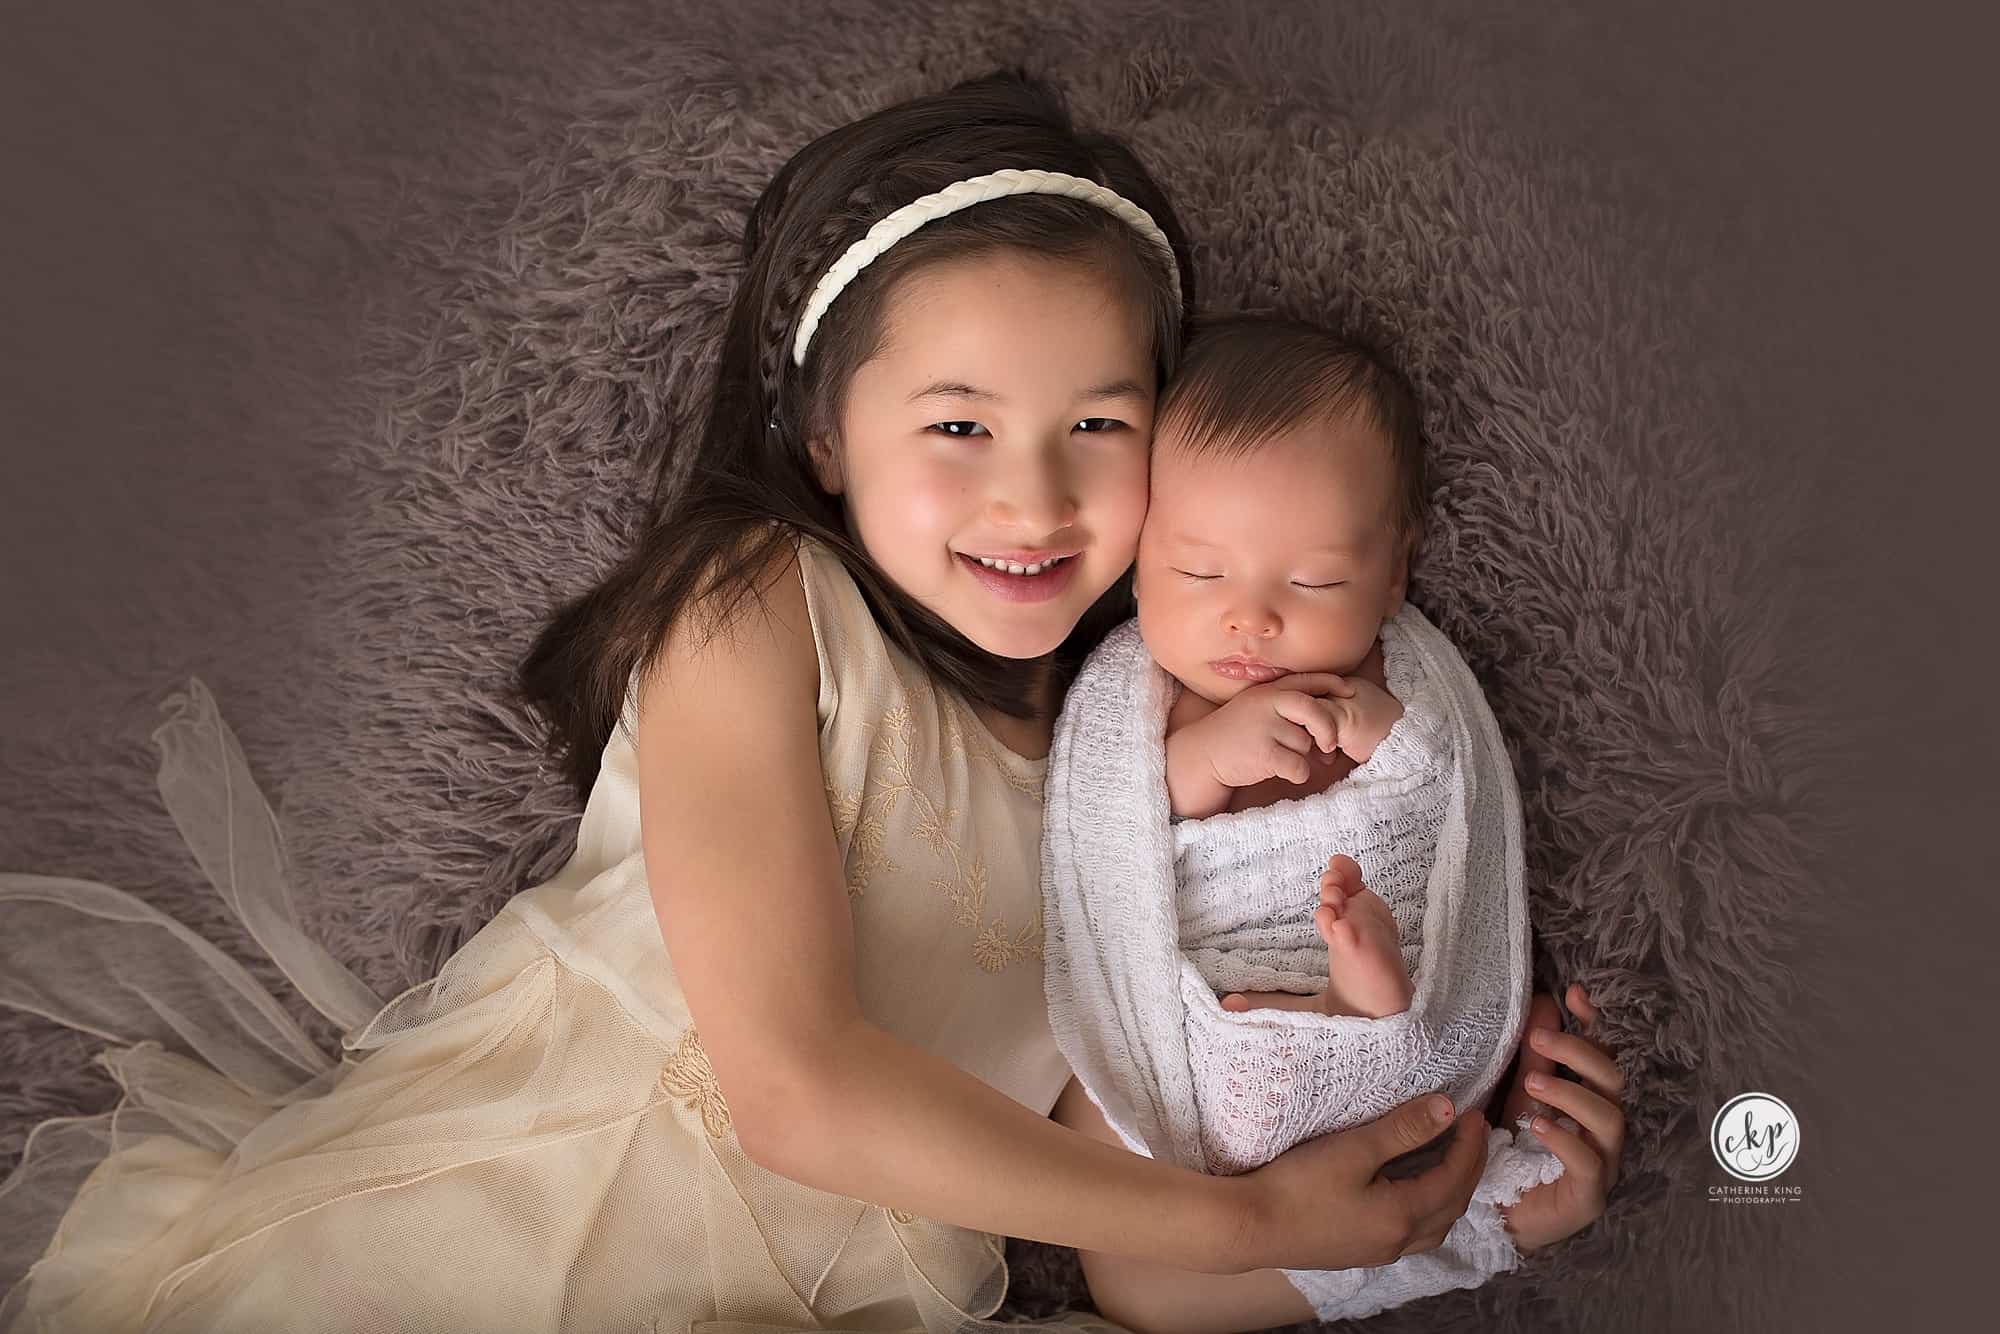 4 week old James and his sister during a newborn photography session